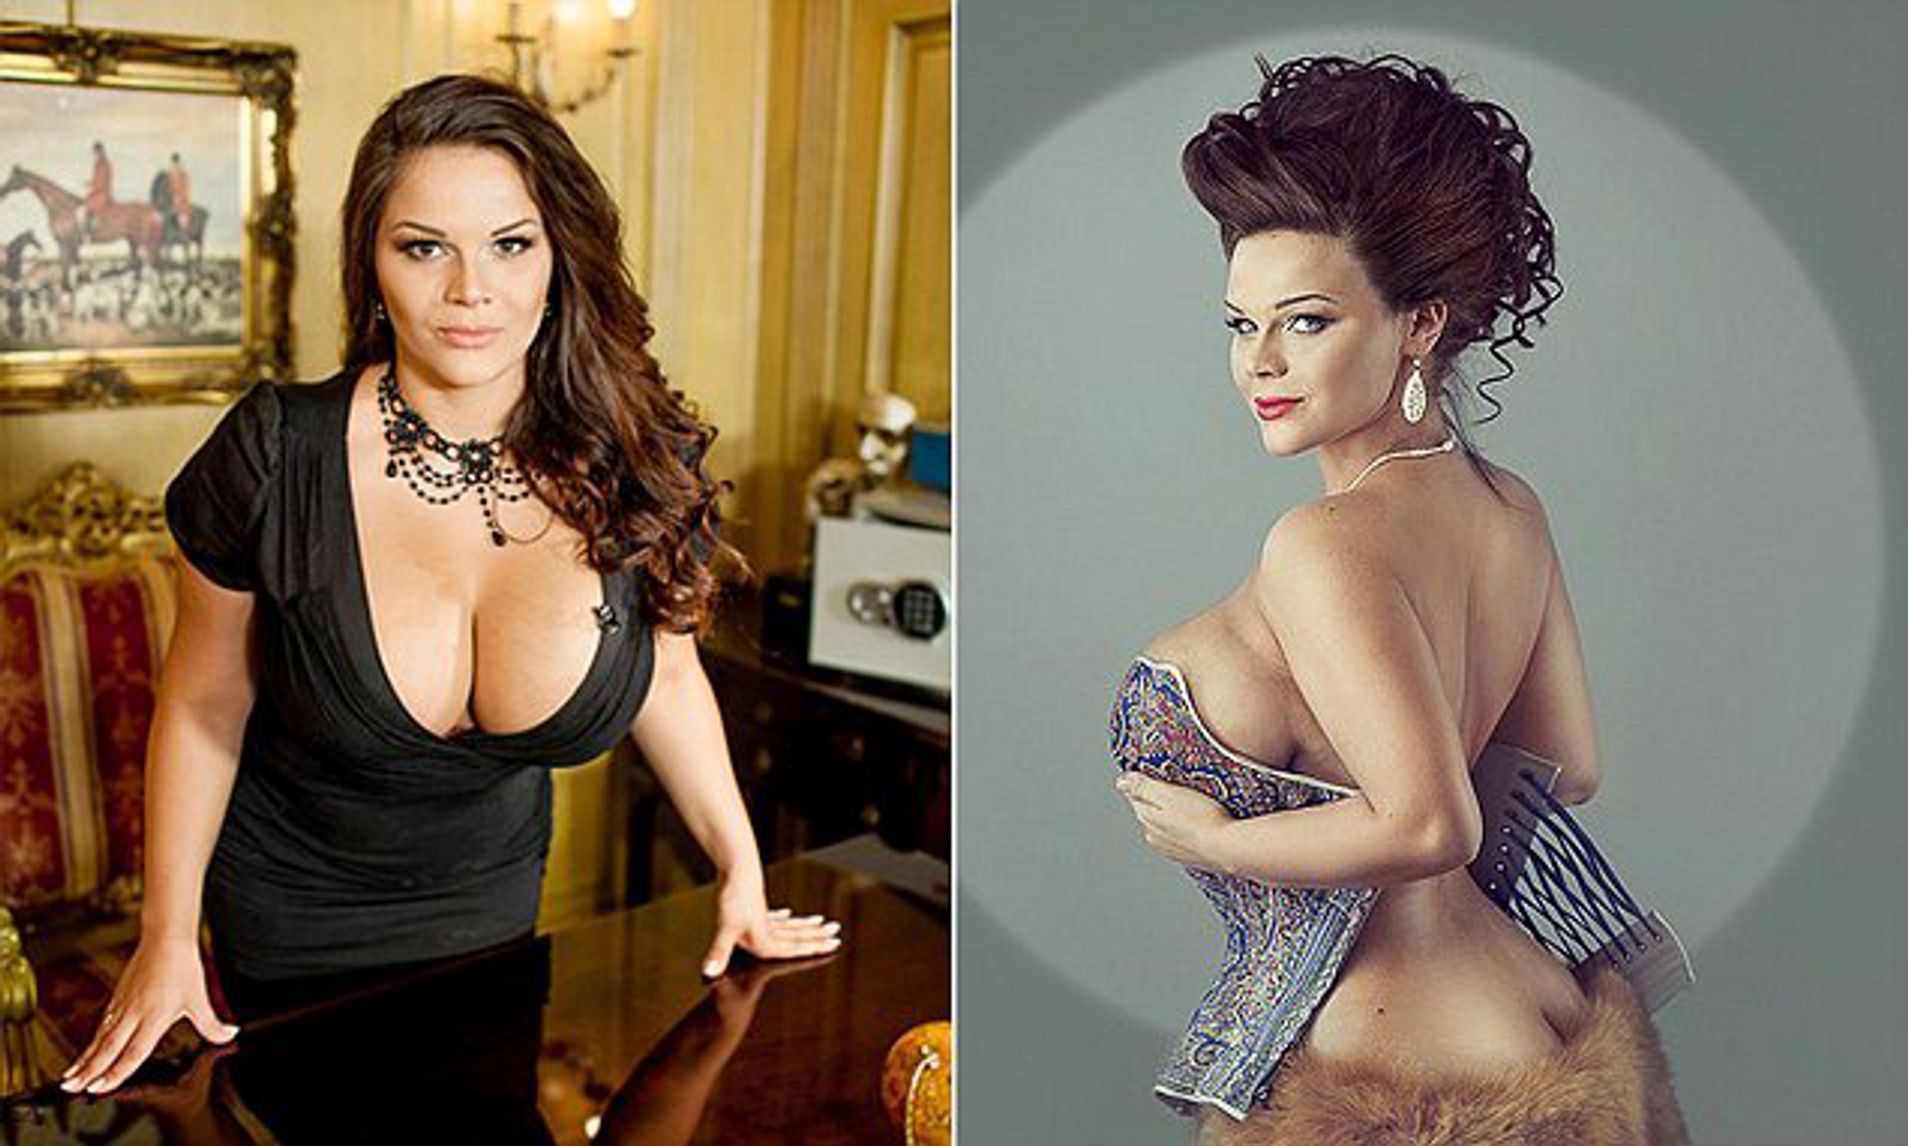 david gainsford recommends russian with huge tits pic